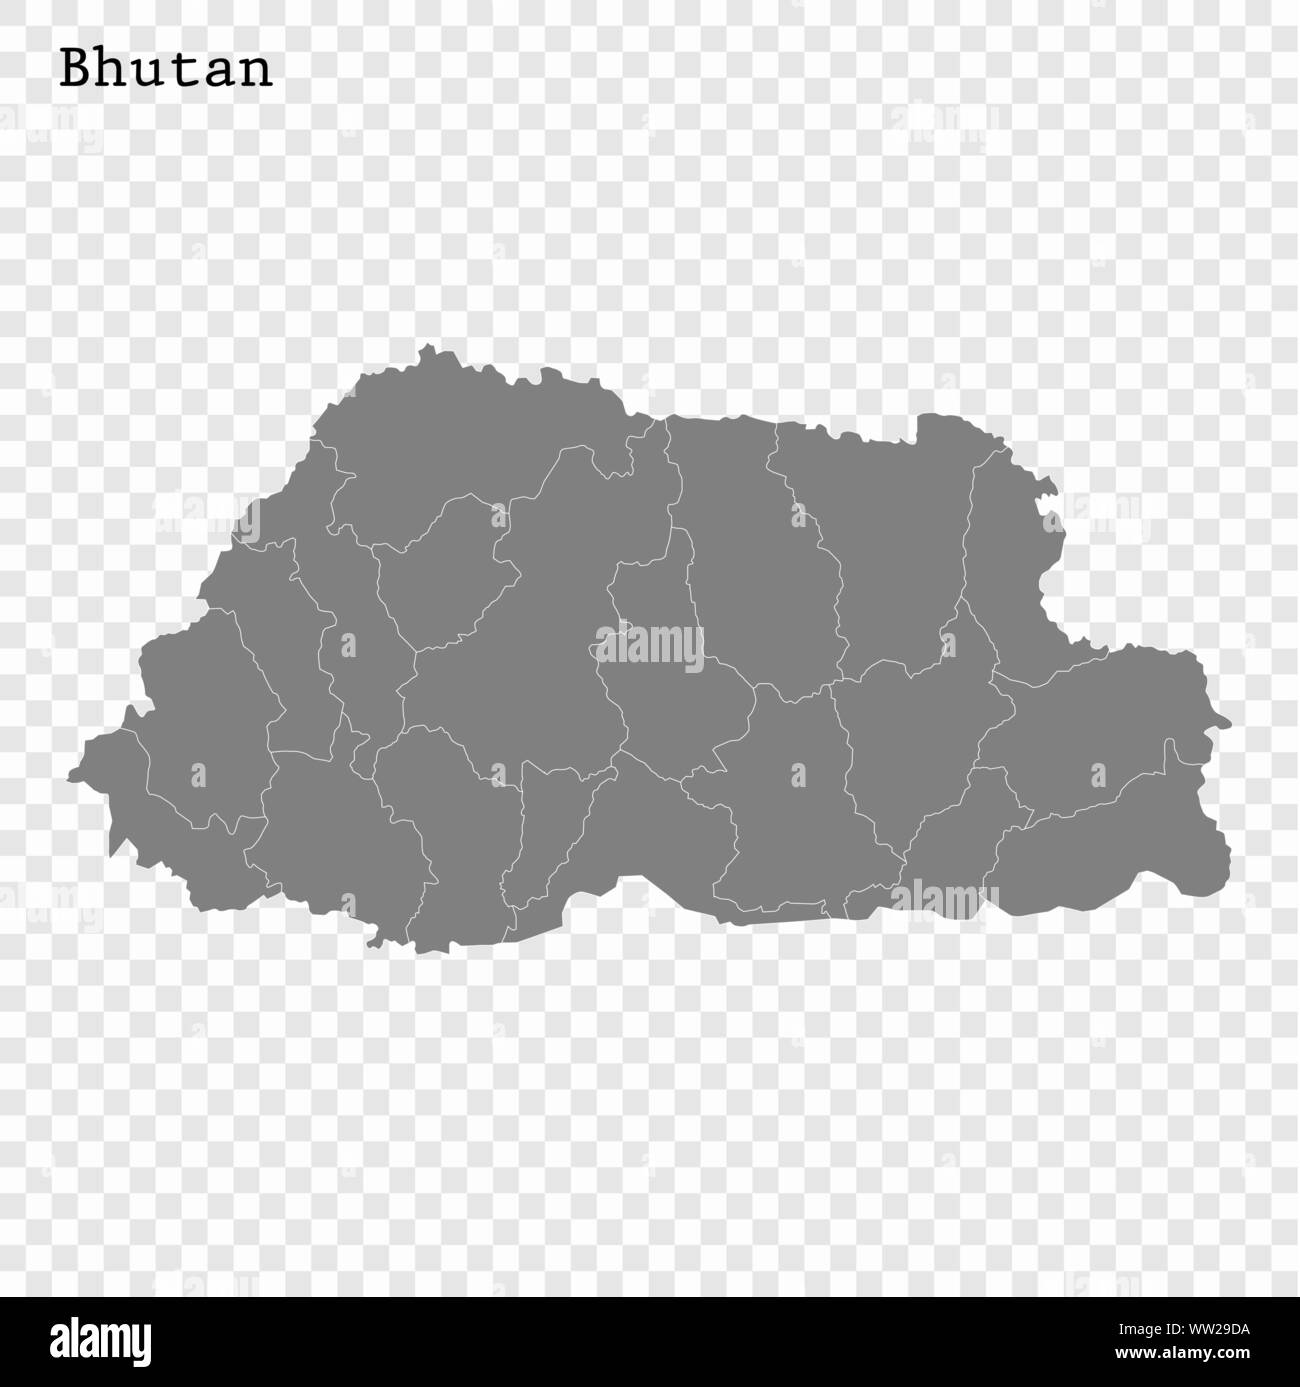 High quality map of Bhutan with borders of the regions Stock Vector